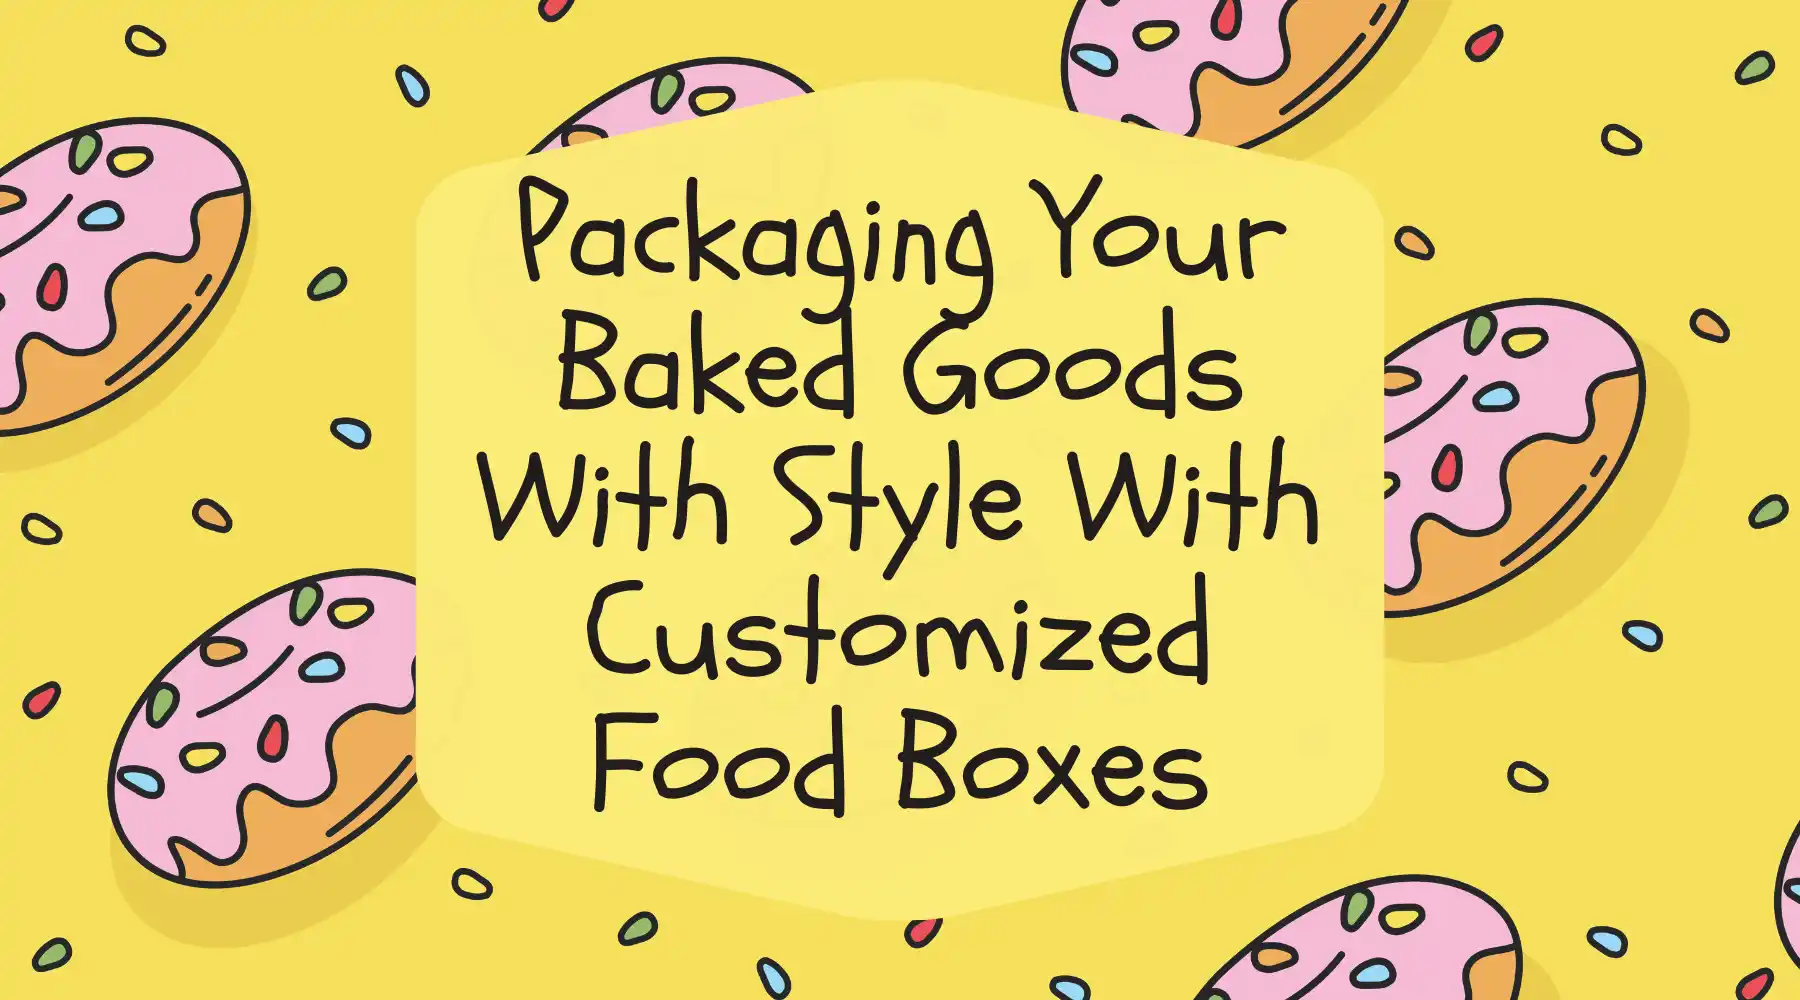 Packaging Your Baked Goods With Style With Customized Food Boxes.webp